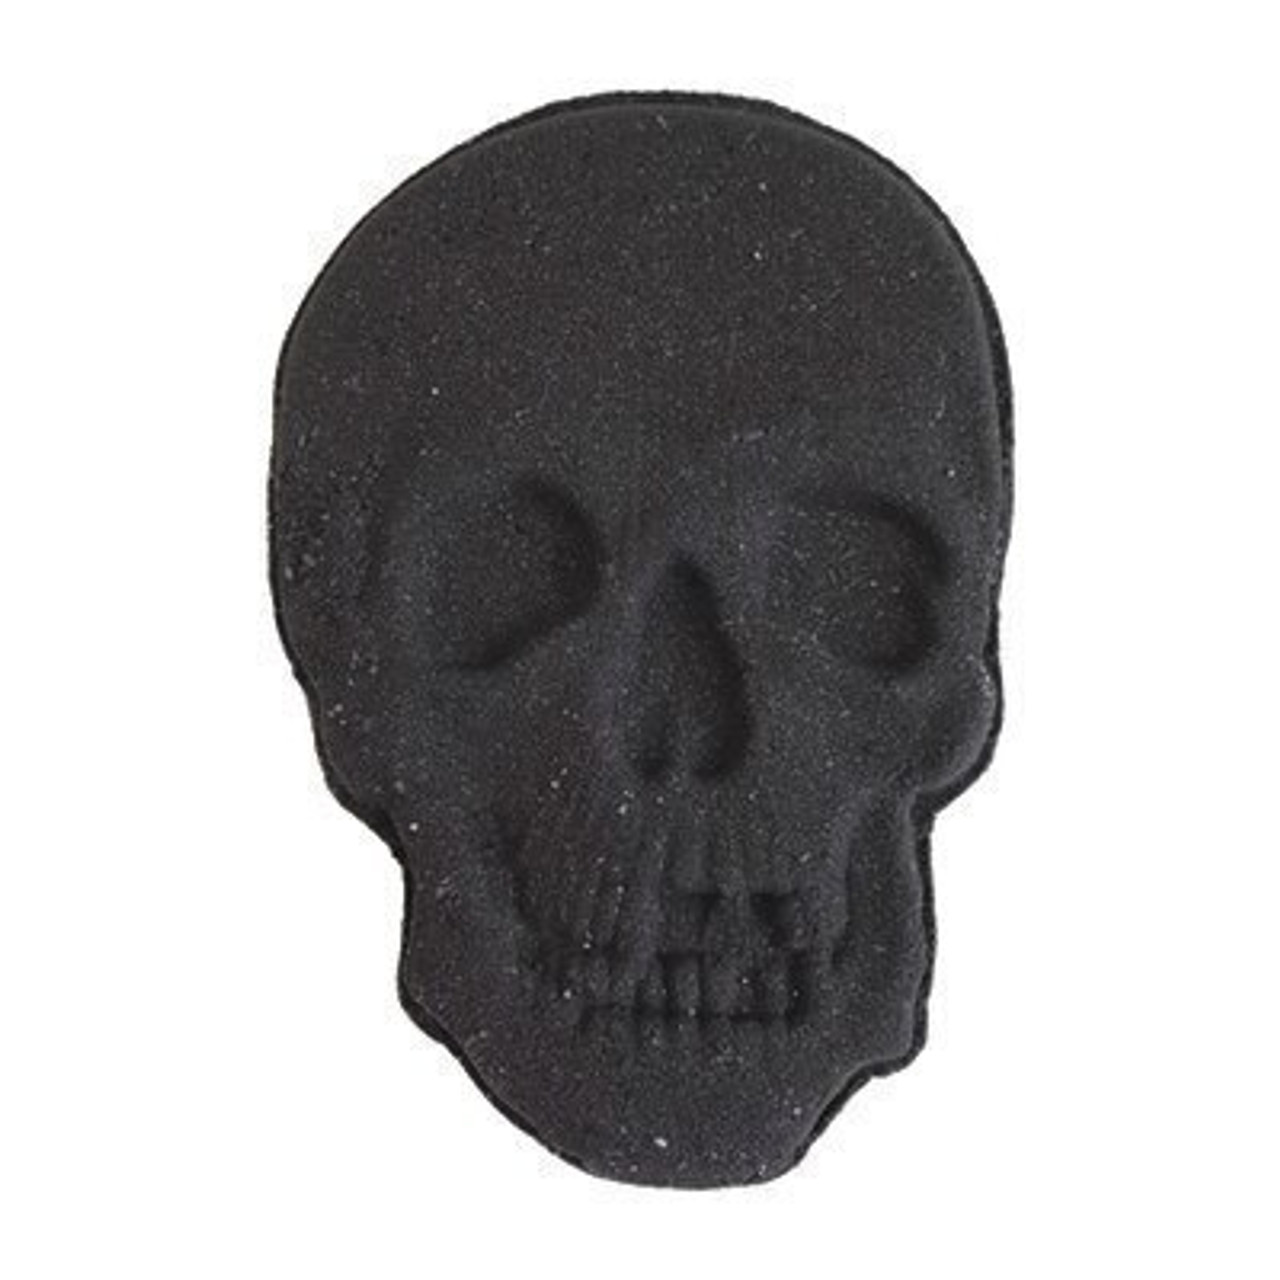 The Ashes Of My Enemies Skull Bath Bomb